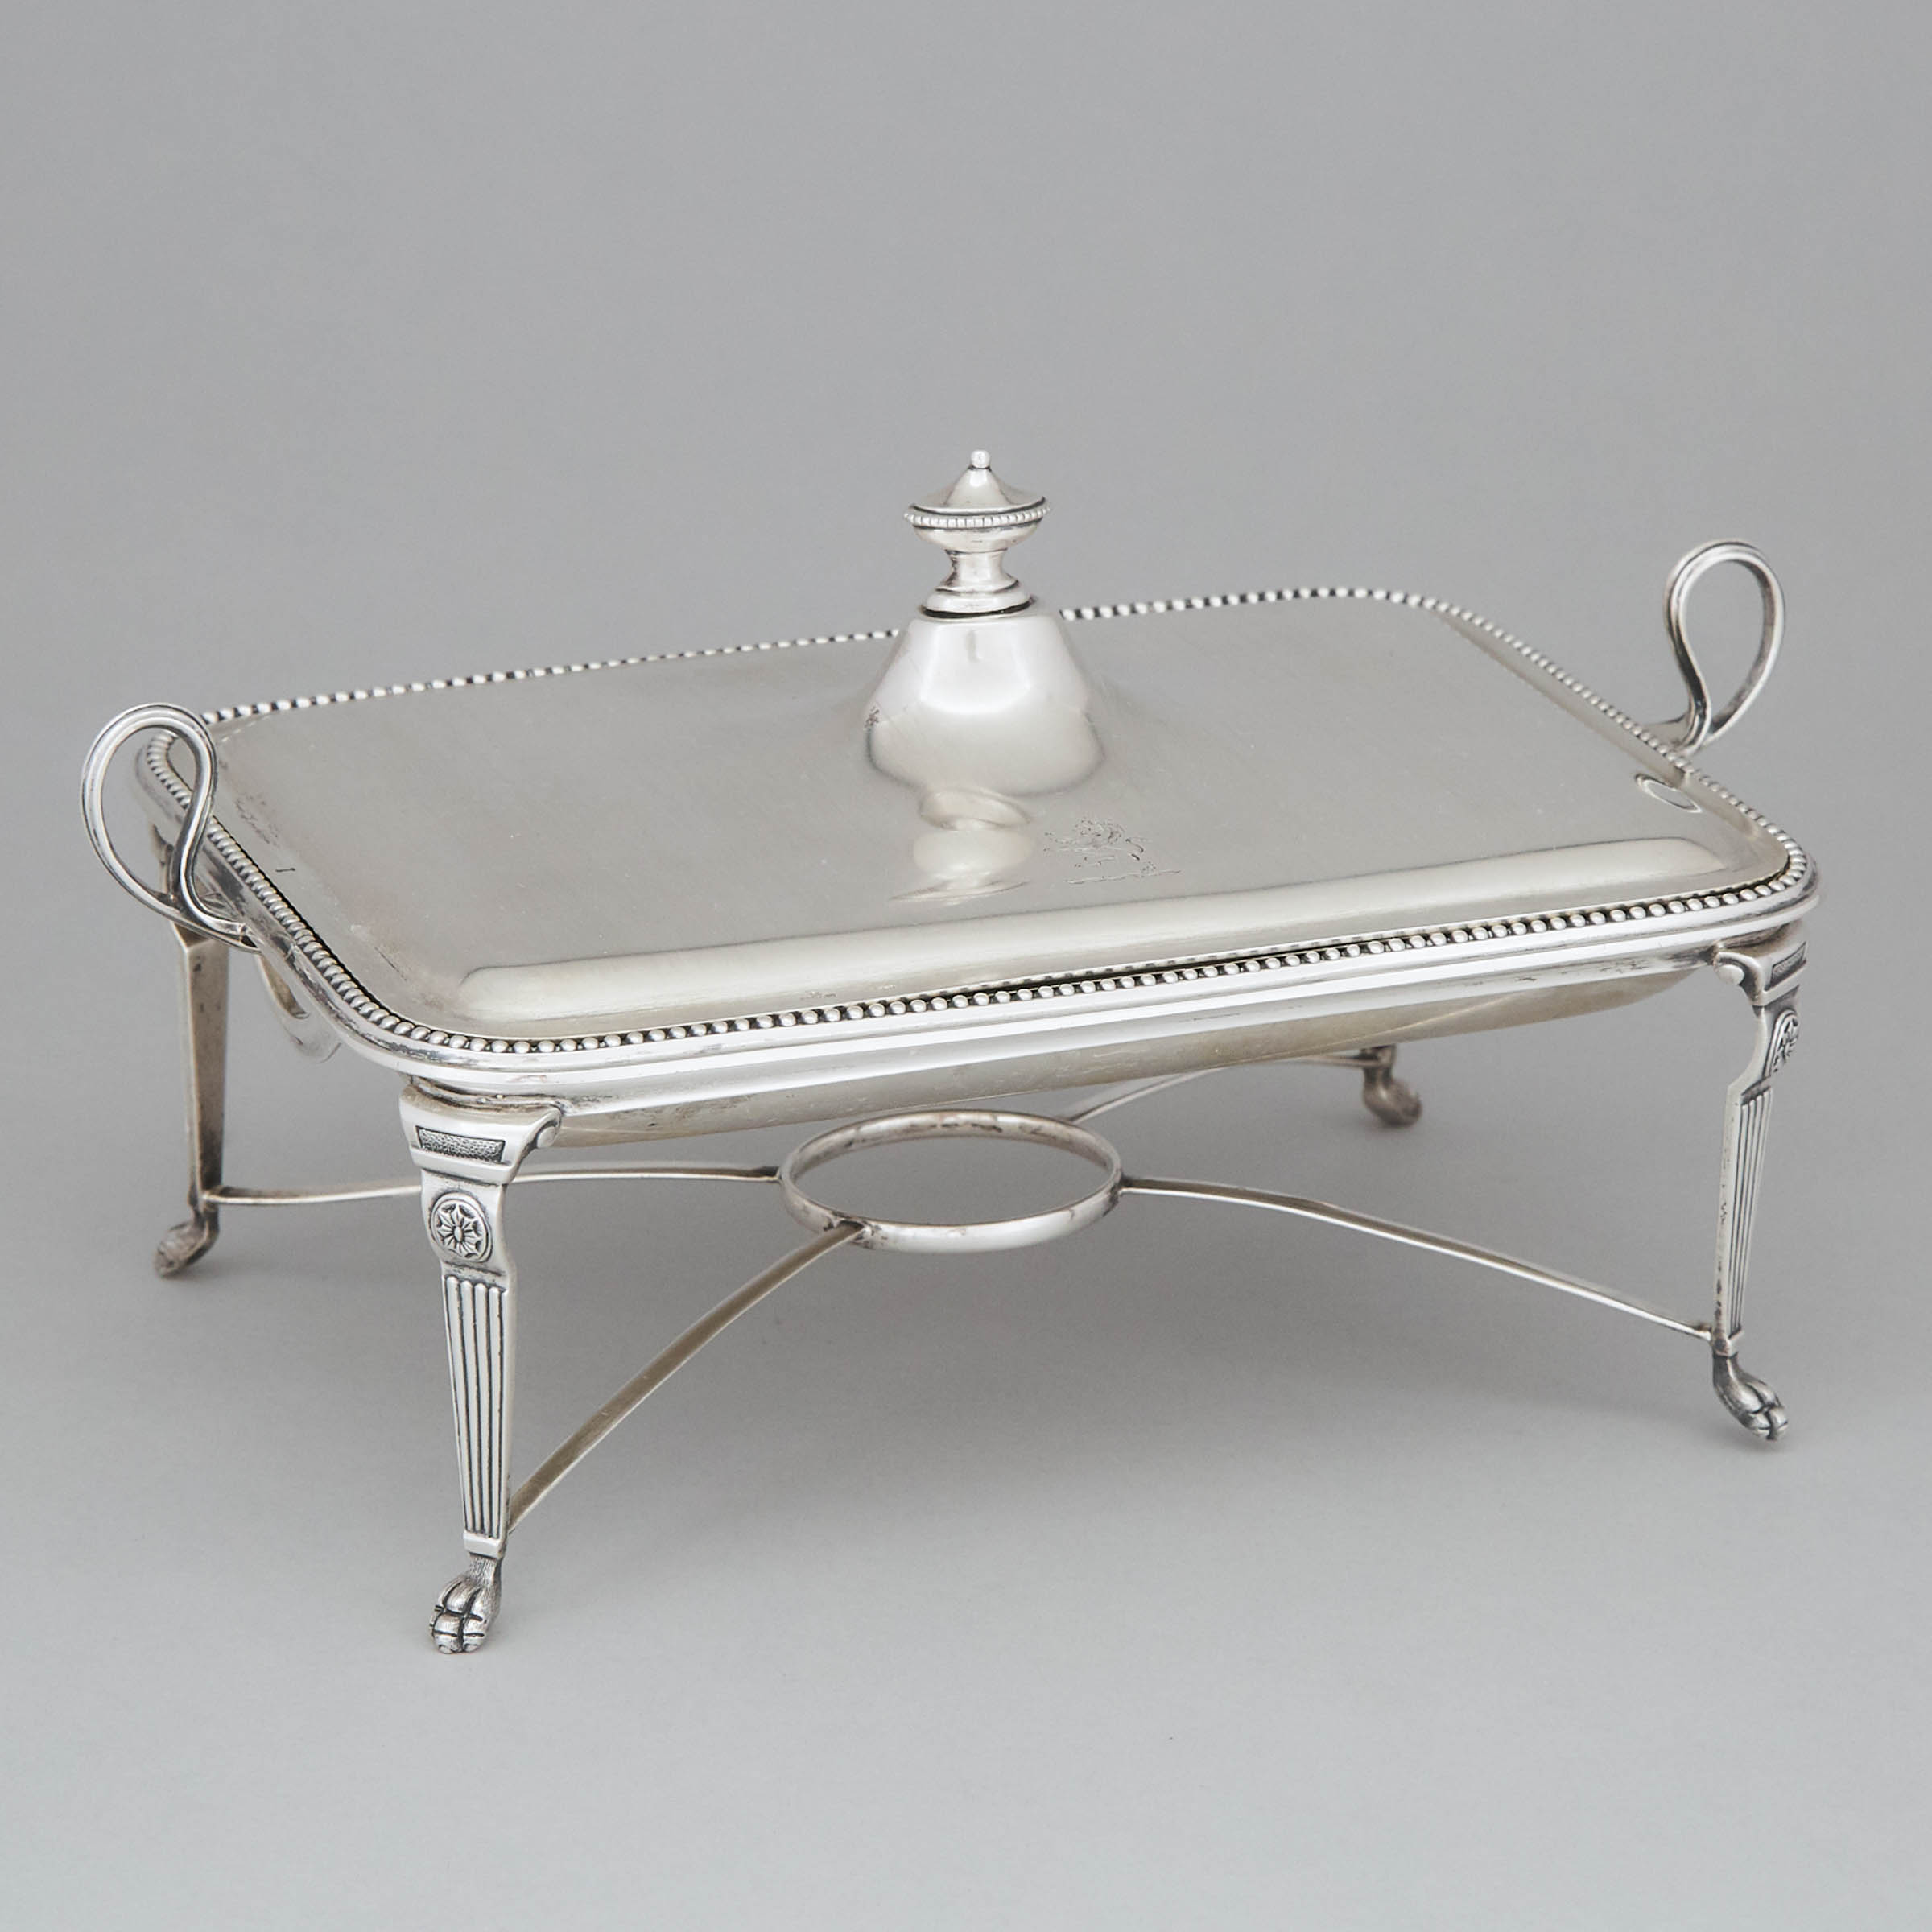 Silver Covered Breakfast Dish with Liner and Stand, probably Russian, 20th century